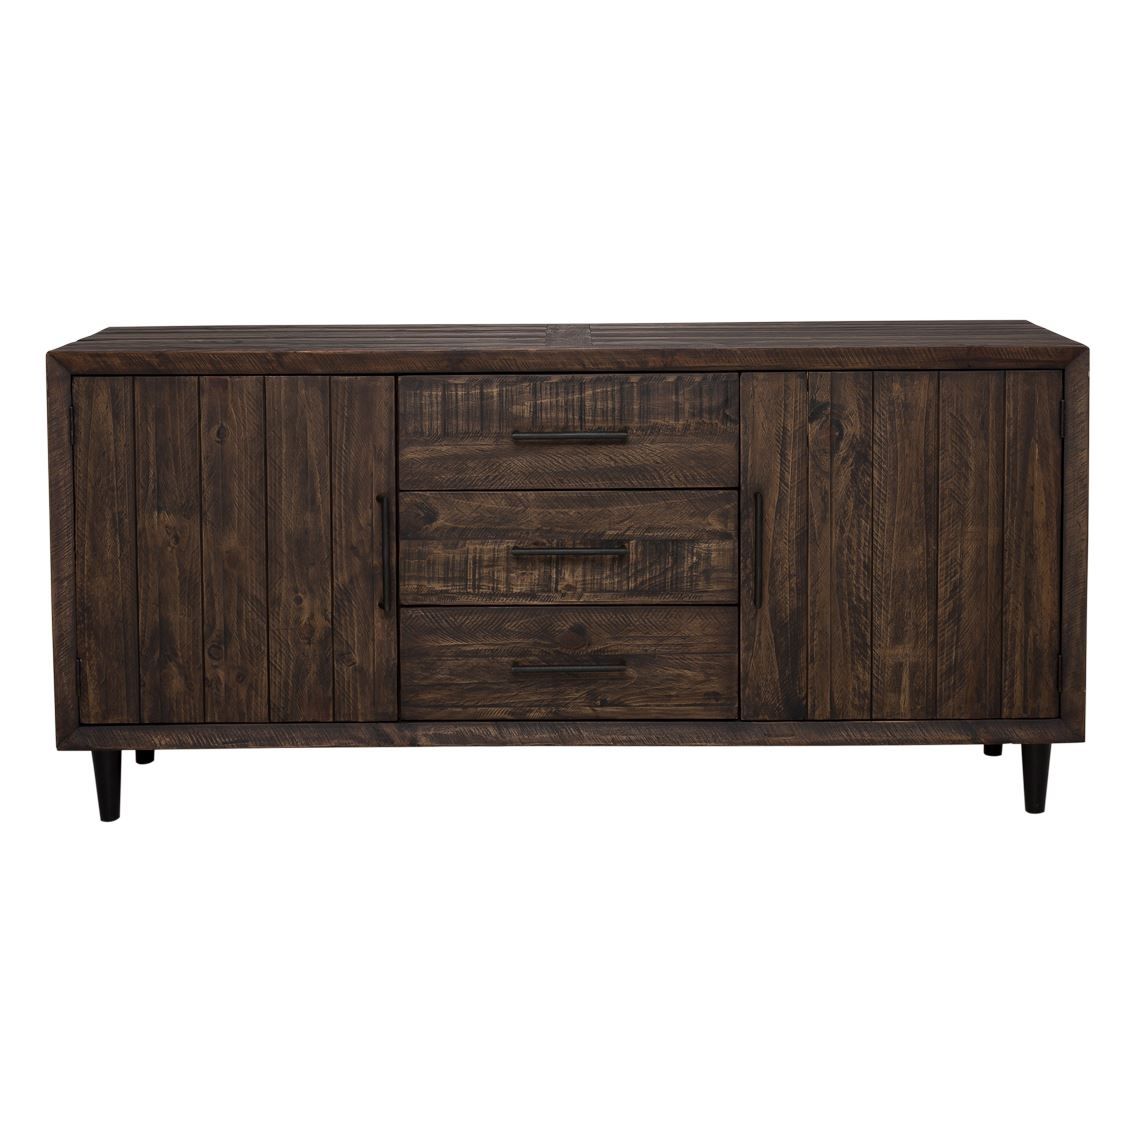 Freedom Furniture And Homewares Pertaining To Newest Walnut Finish 4 Door Sideboards (View 14 of 20)